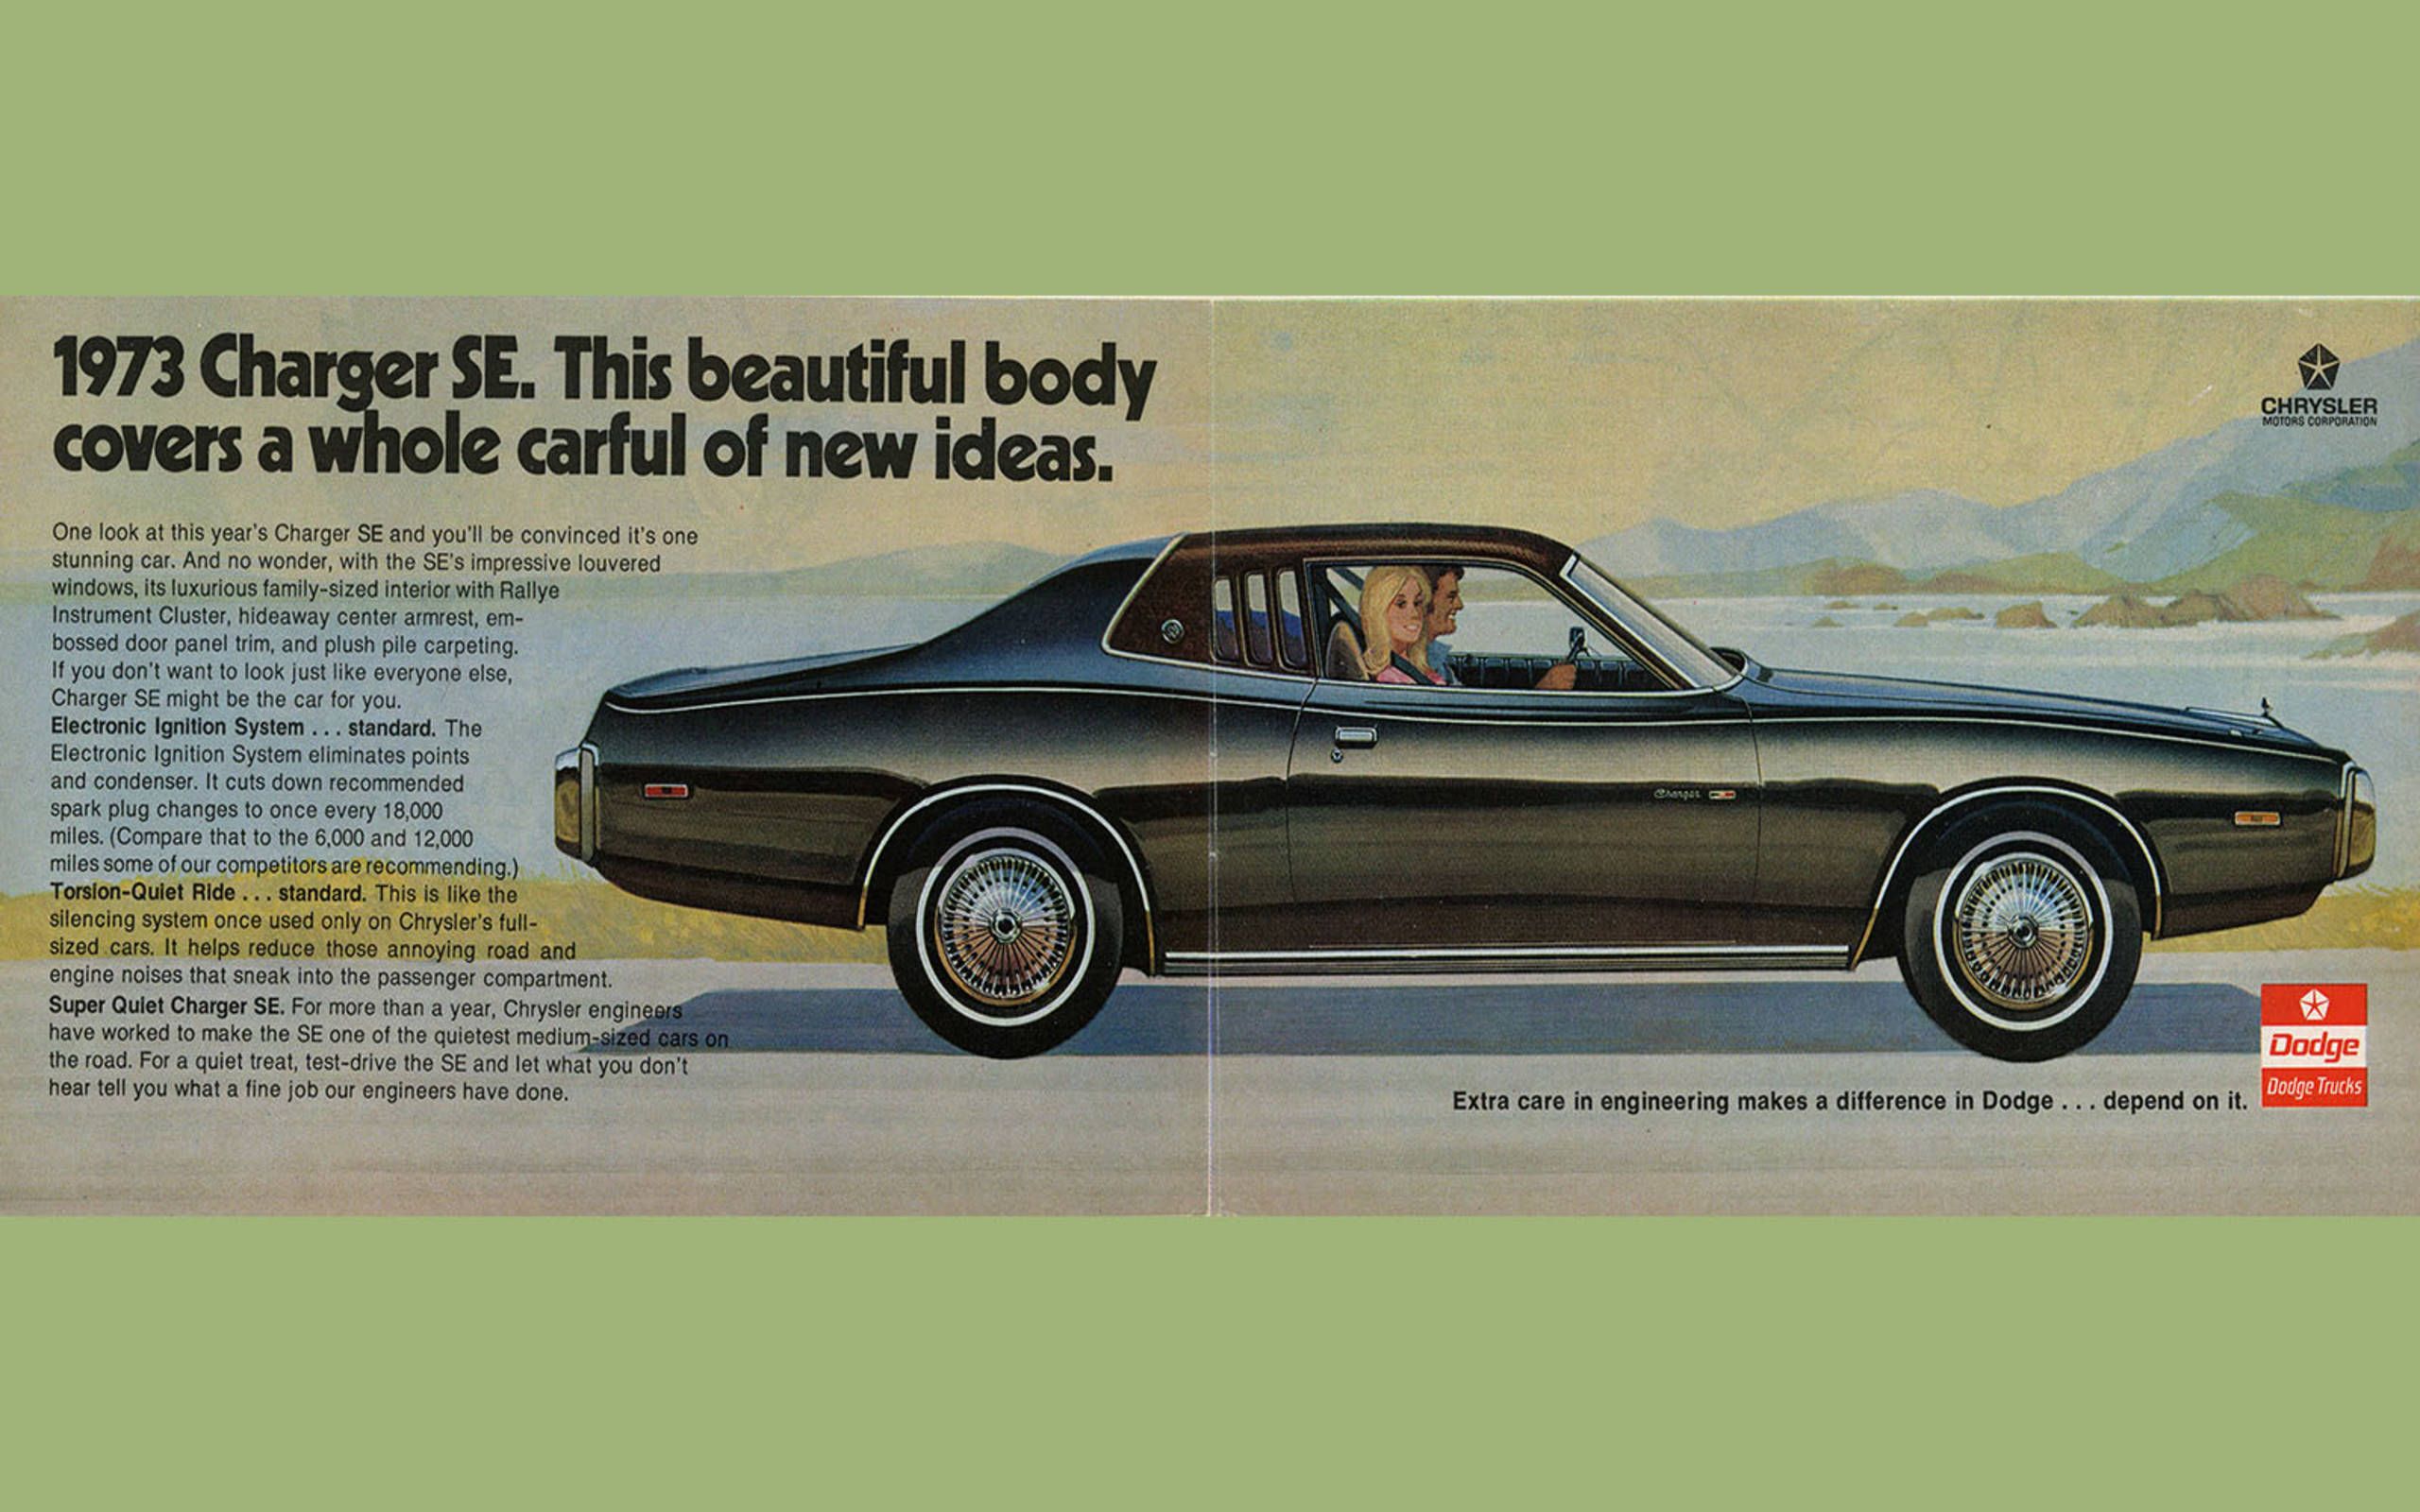 1973: The Dodge Charger's big selling point is...quietness